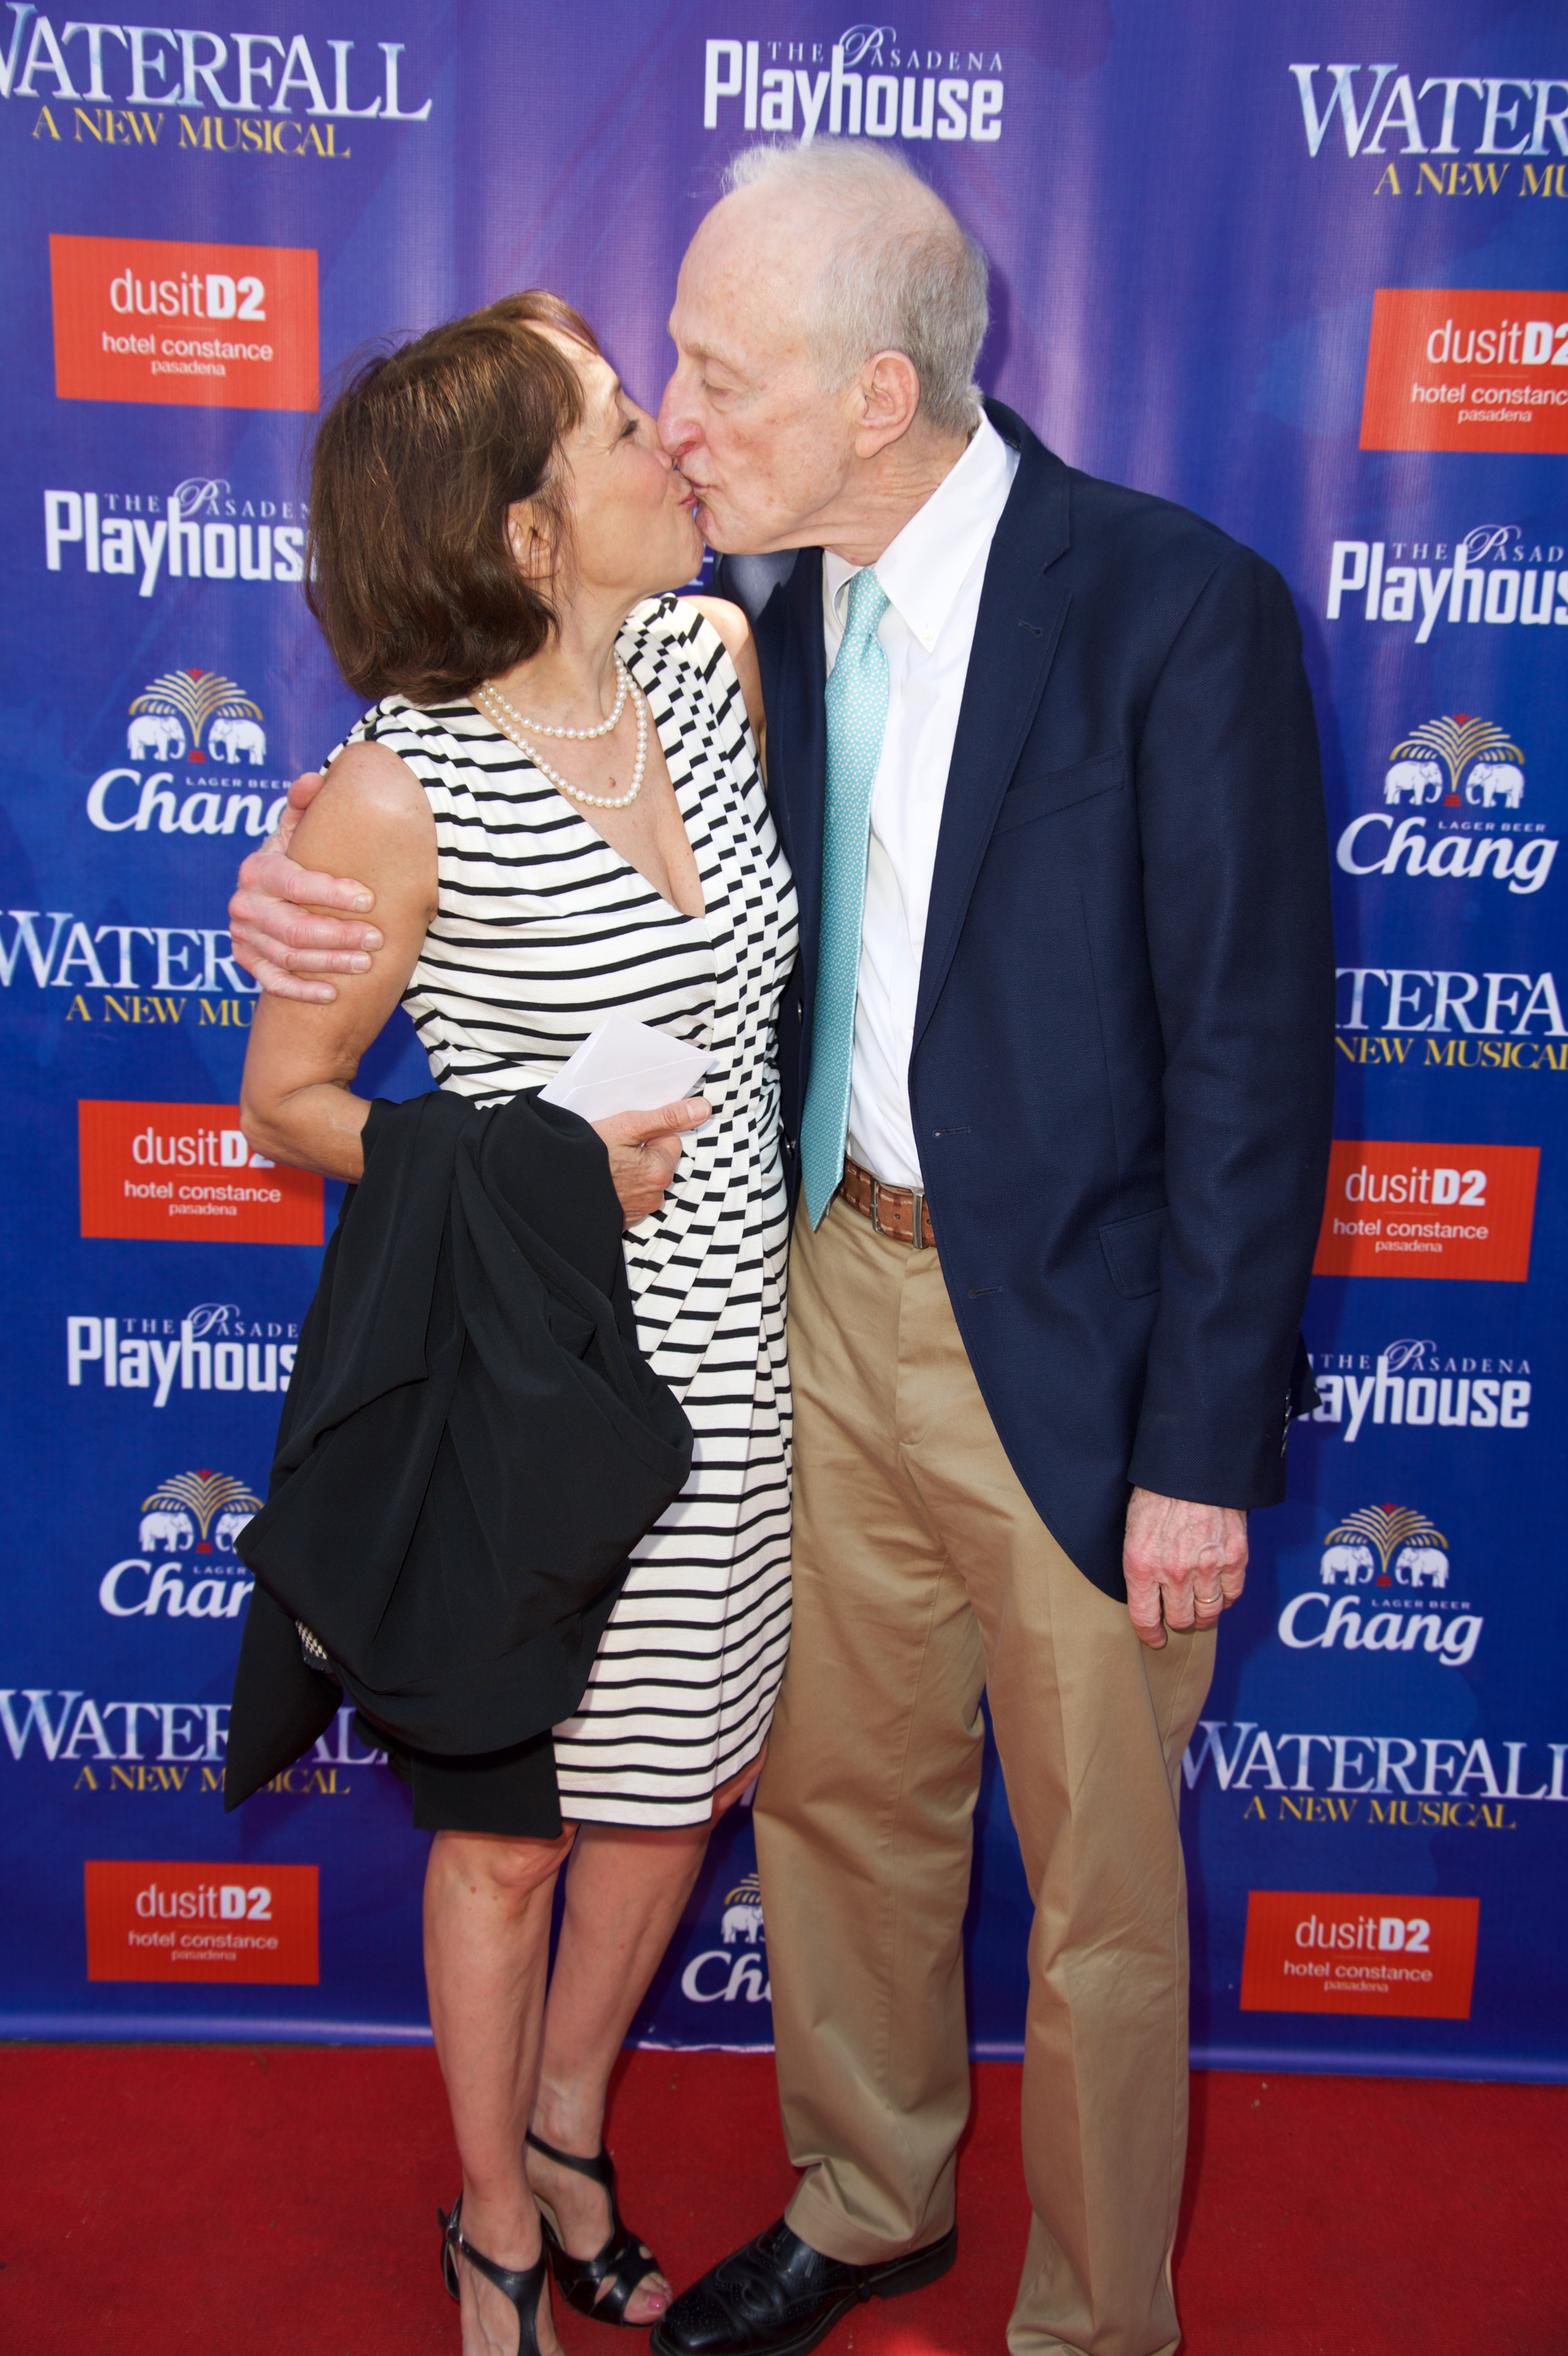 Didi Conn and David Shire at the opening night performance of "Waterfall" on June 7, 2015, in Pasadena, California | Source: Getty Images